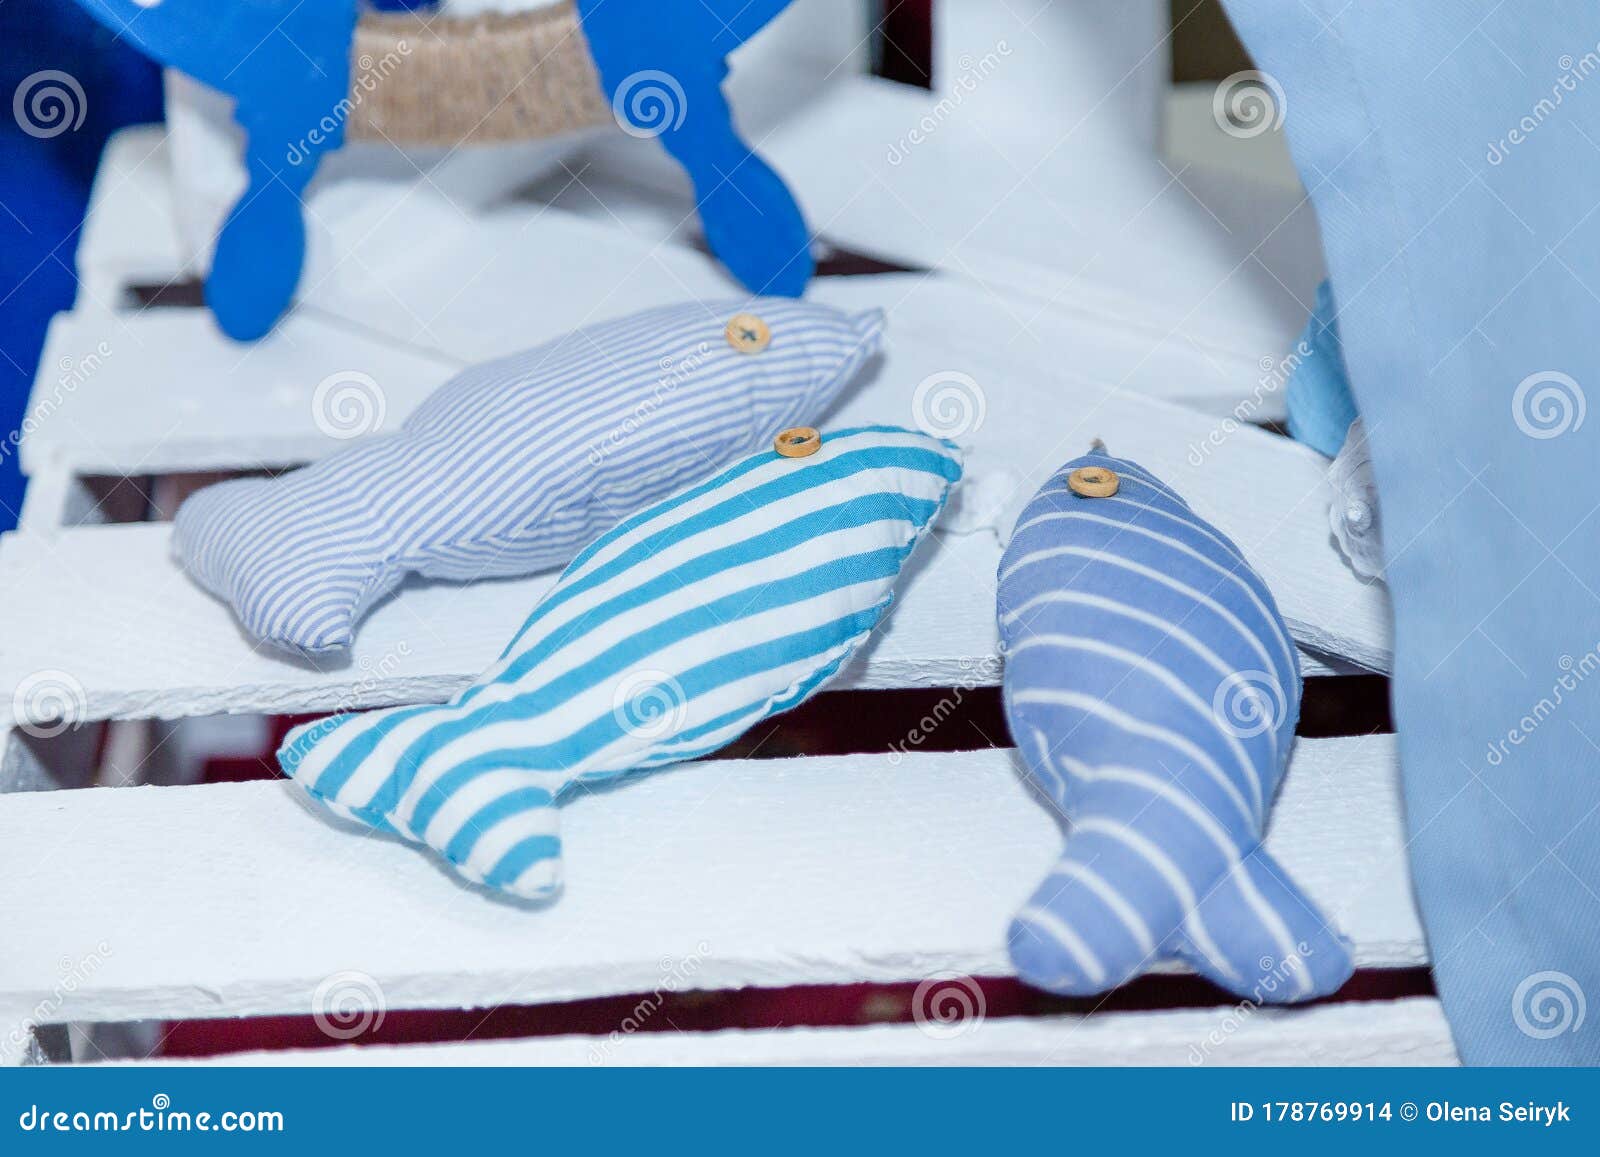 Thematic Sea Party Decorations - Soft Fish Toys Stitched from Blue Stripy  Fabric. Birthday Toys for Boy Fishing Game Stock Photo - Image of decor,  object: 178769914